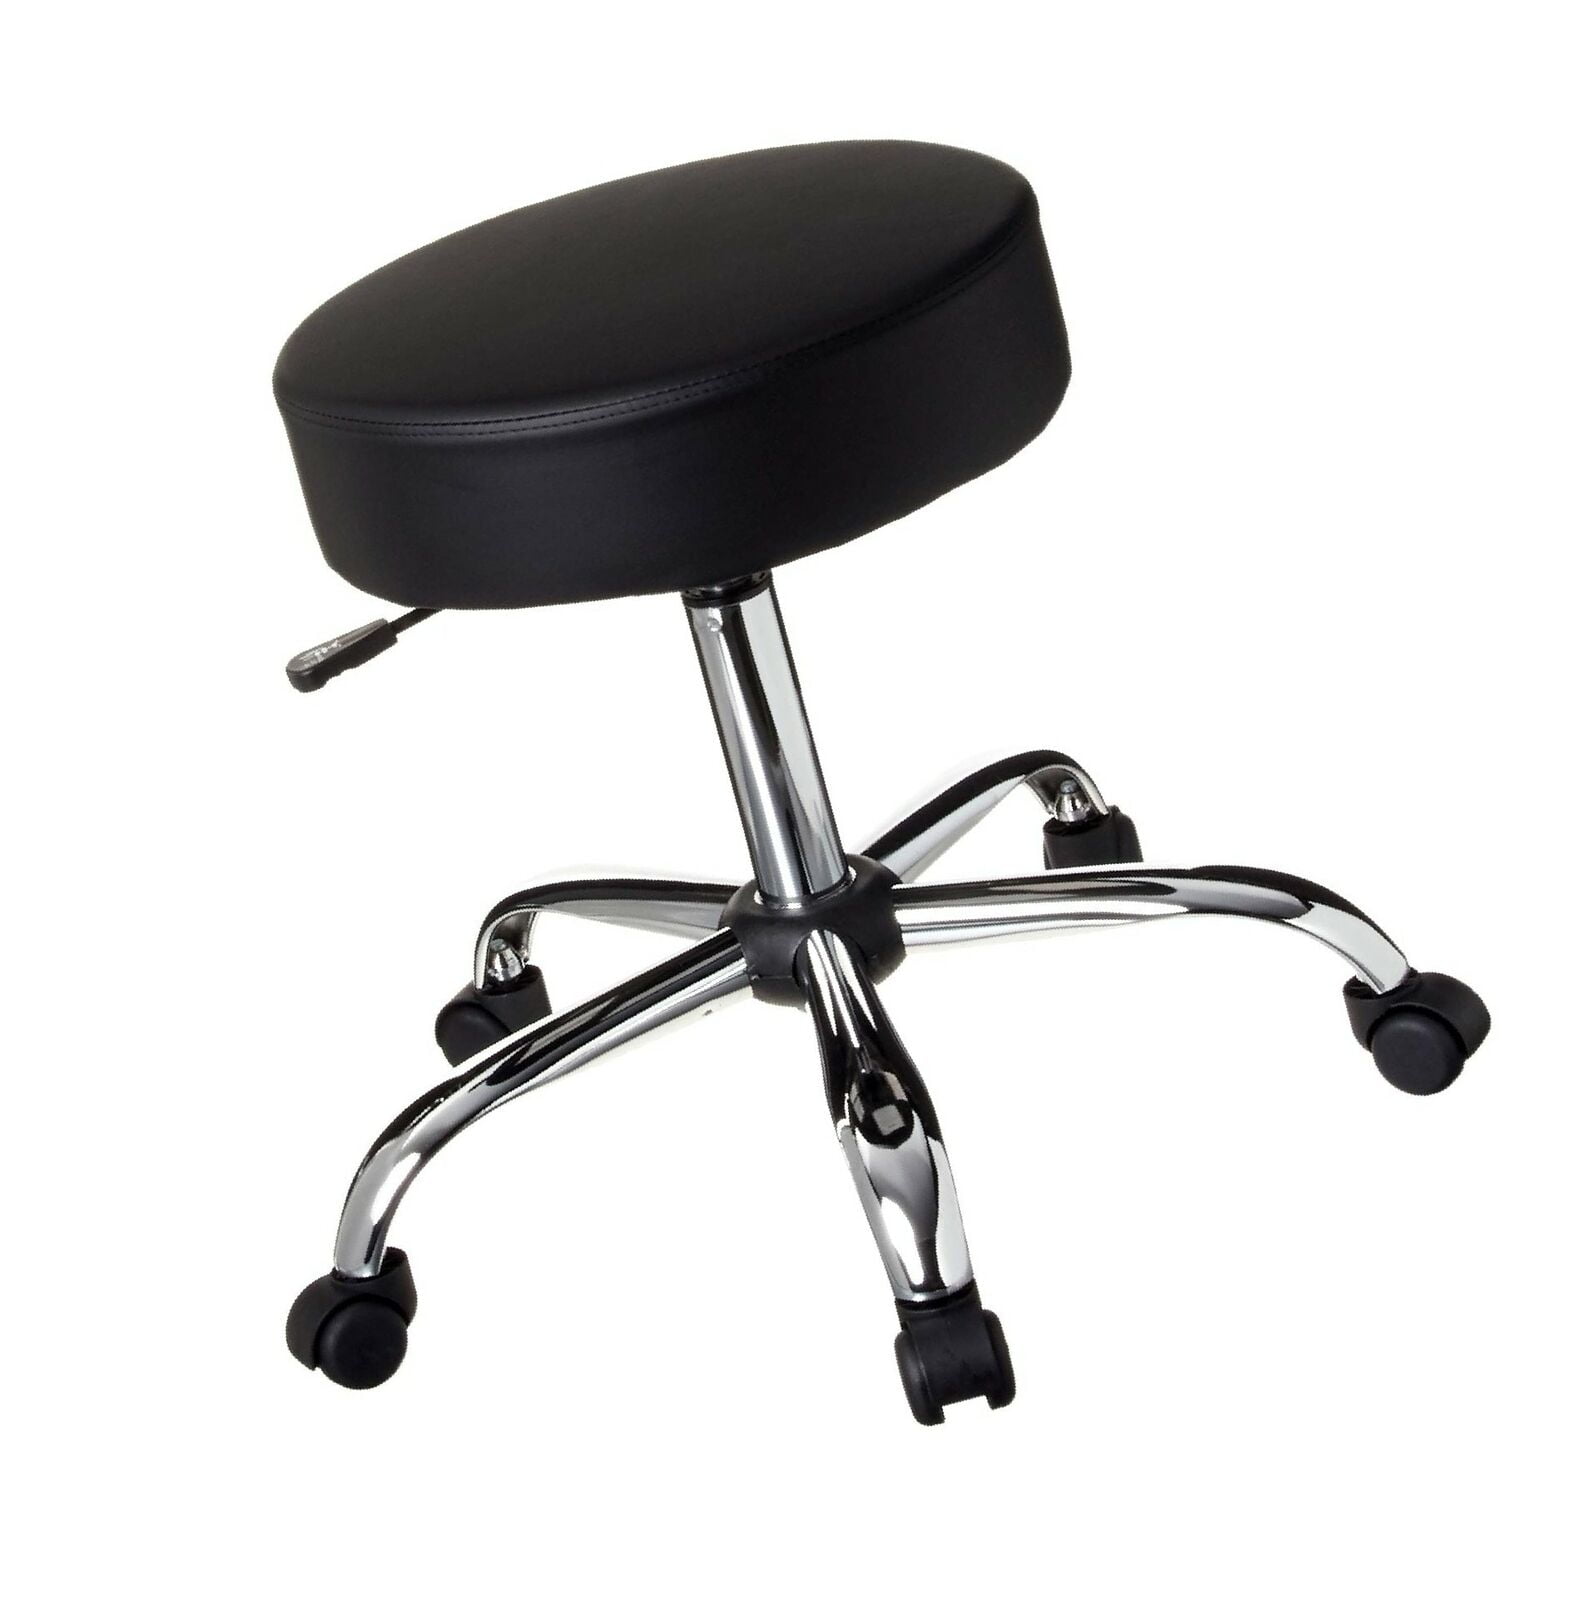 Boss Office Products Be Well Medical Spa Stool in Black No Back Cushion